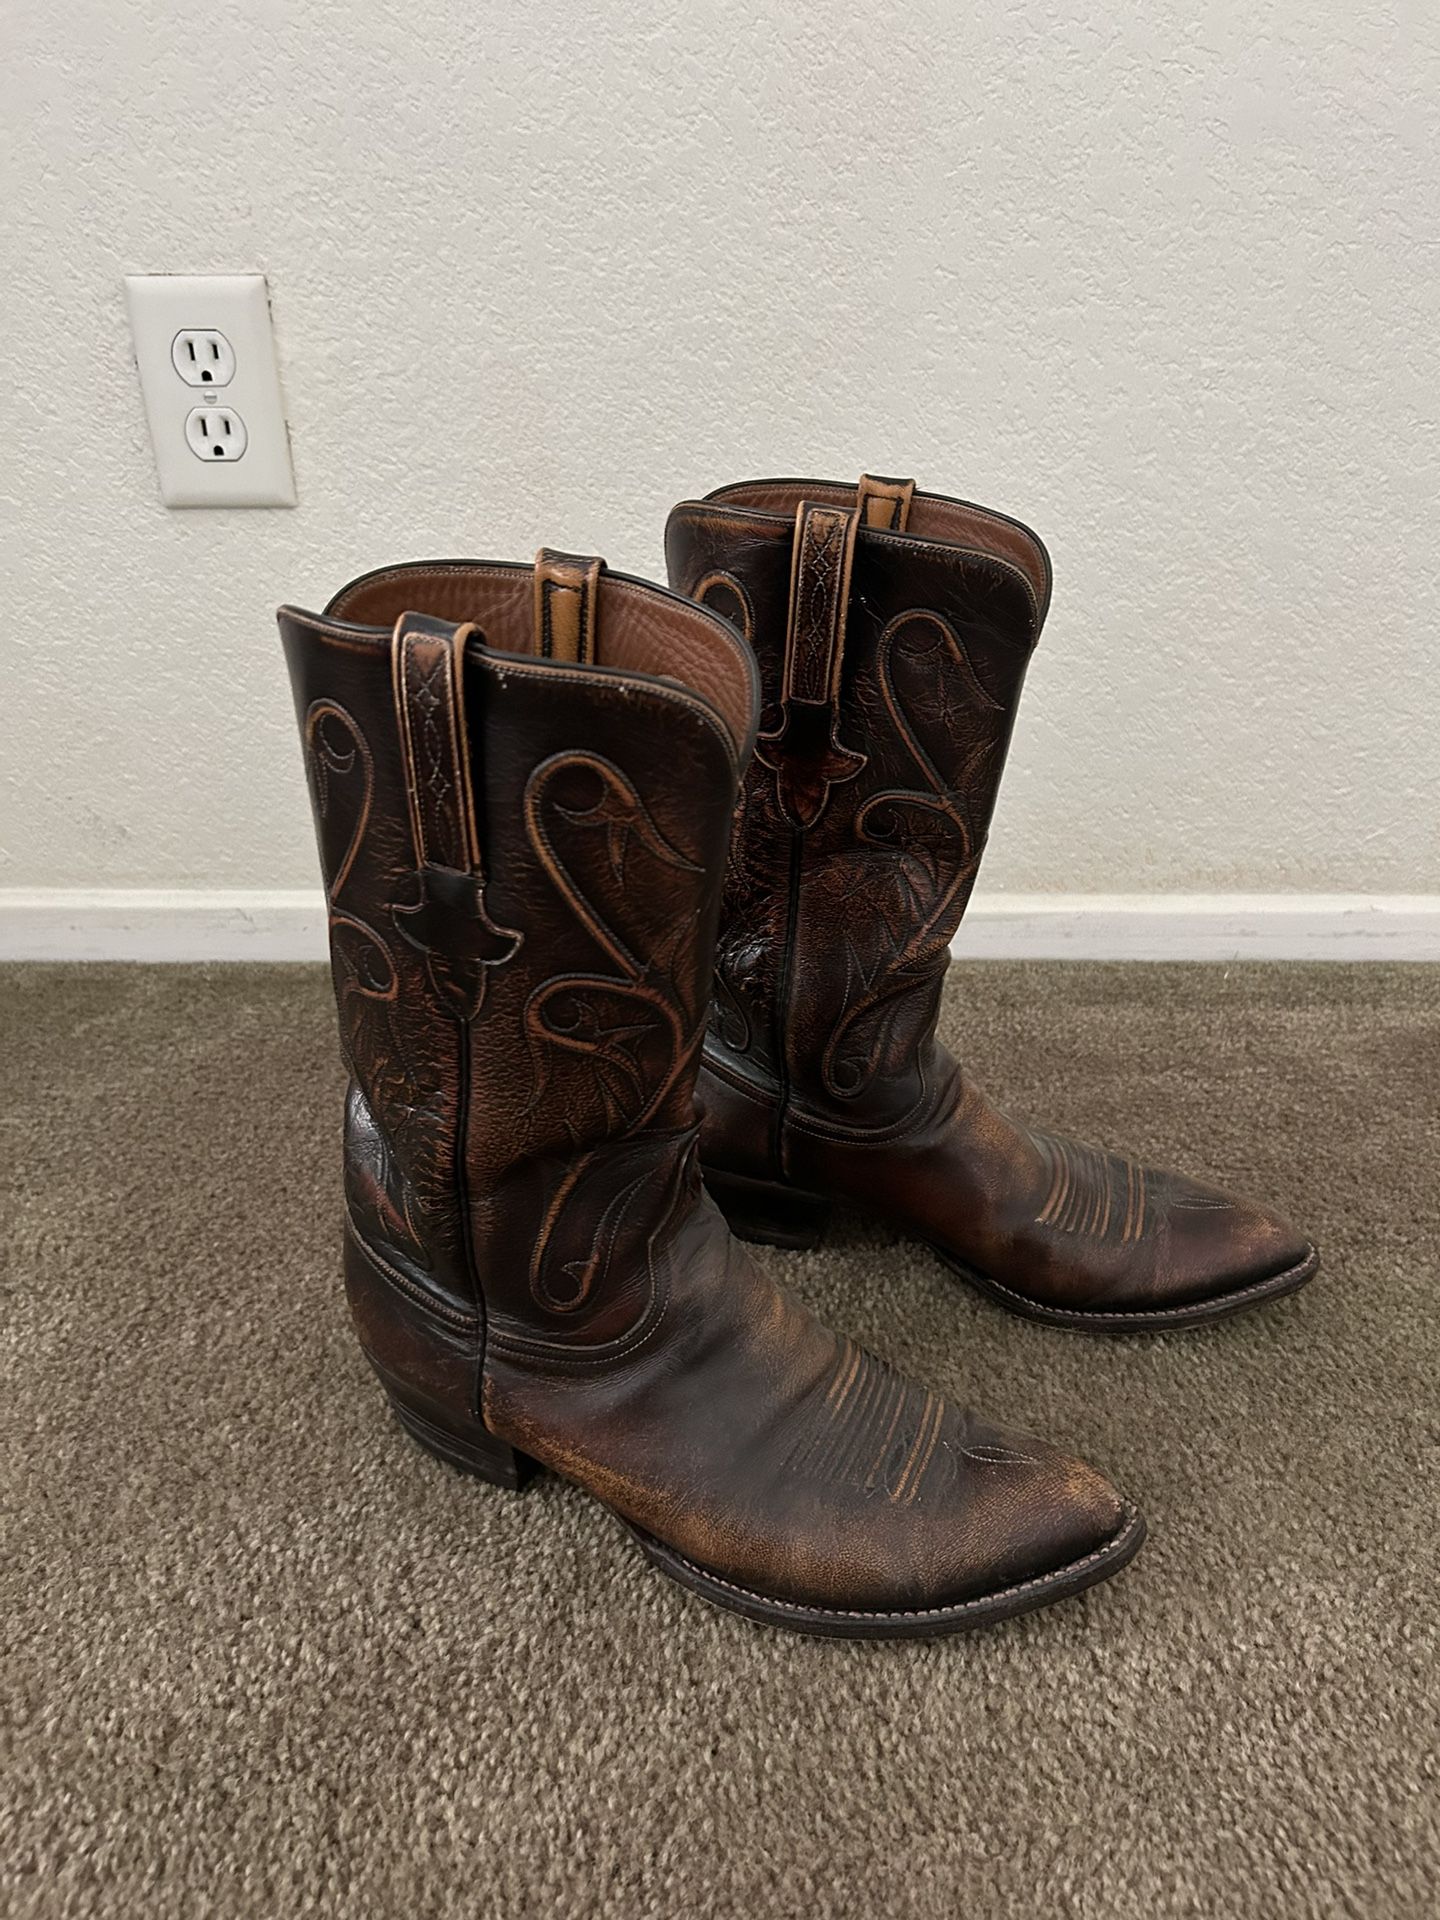 Lucchese Boots 10.5 Men